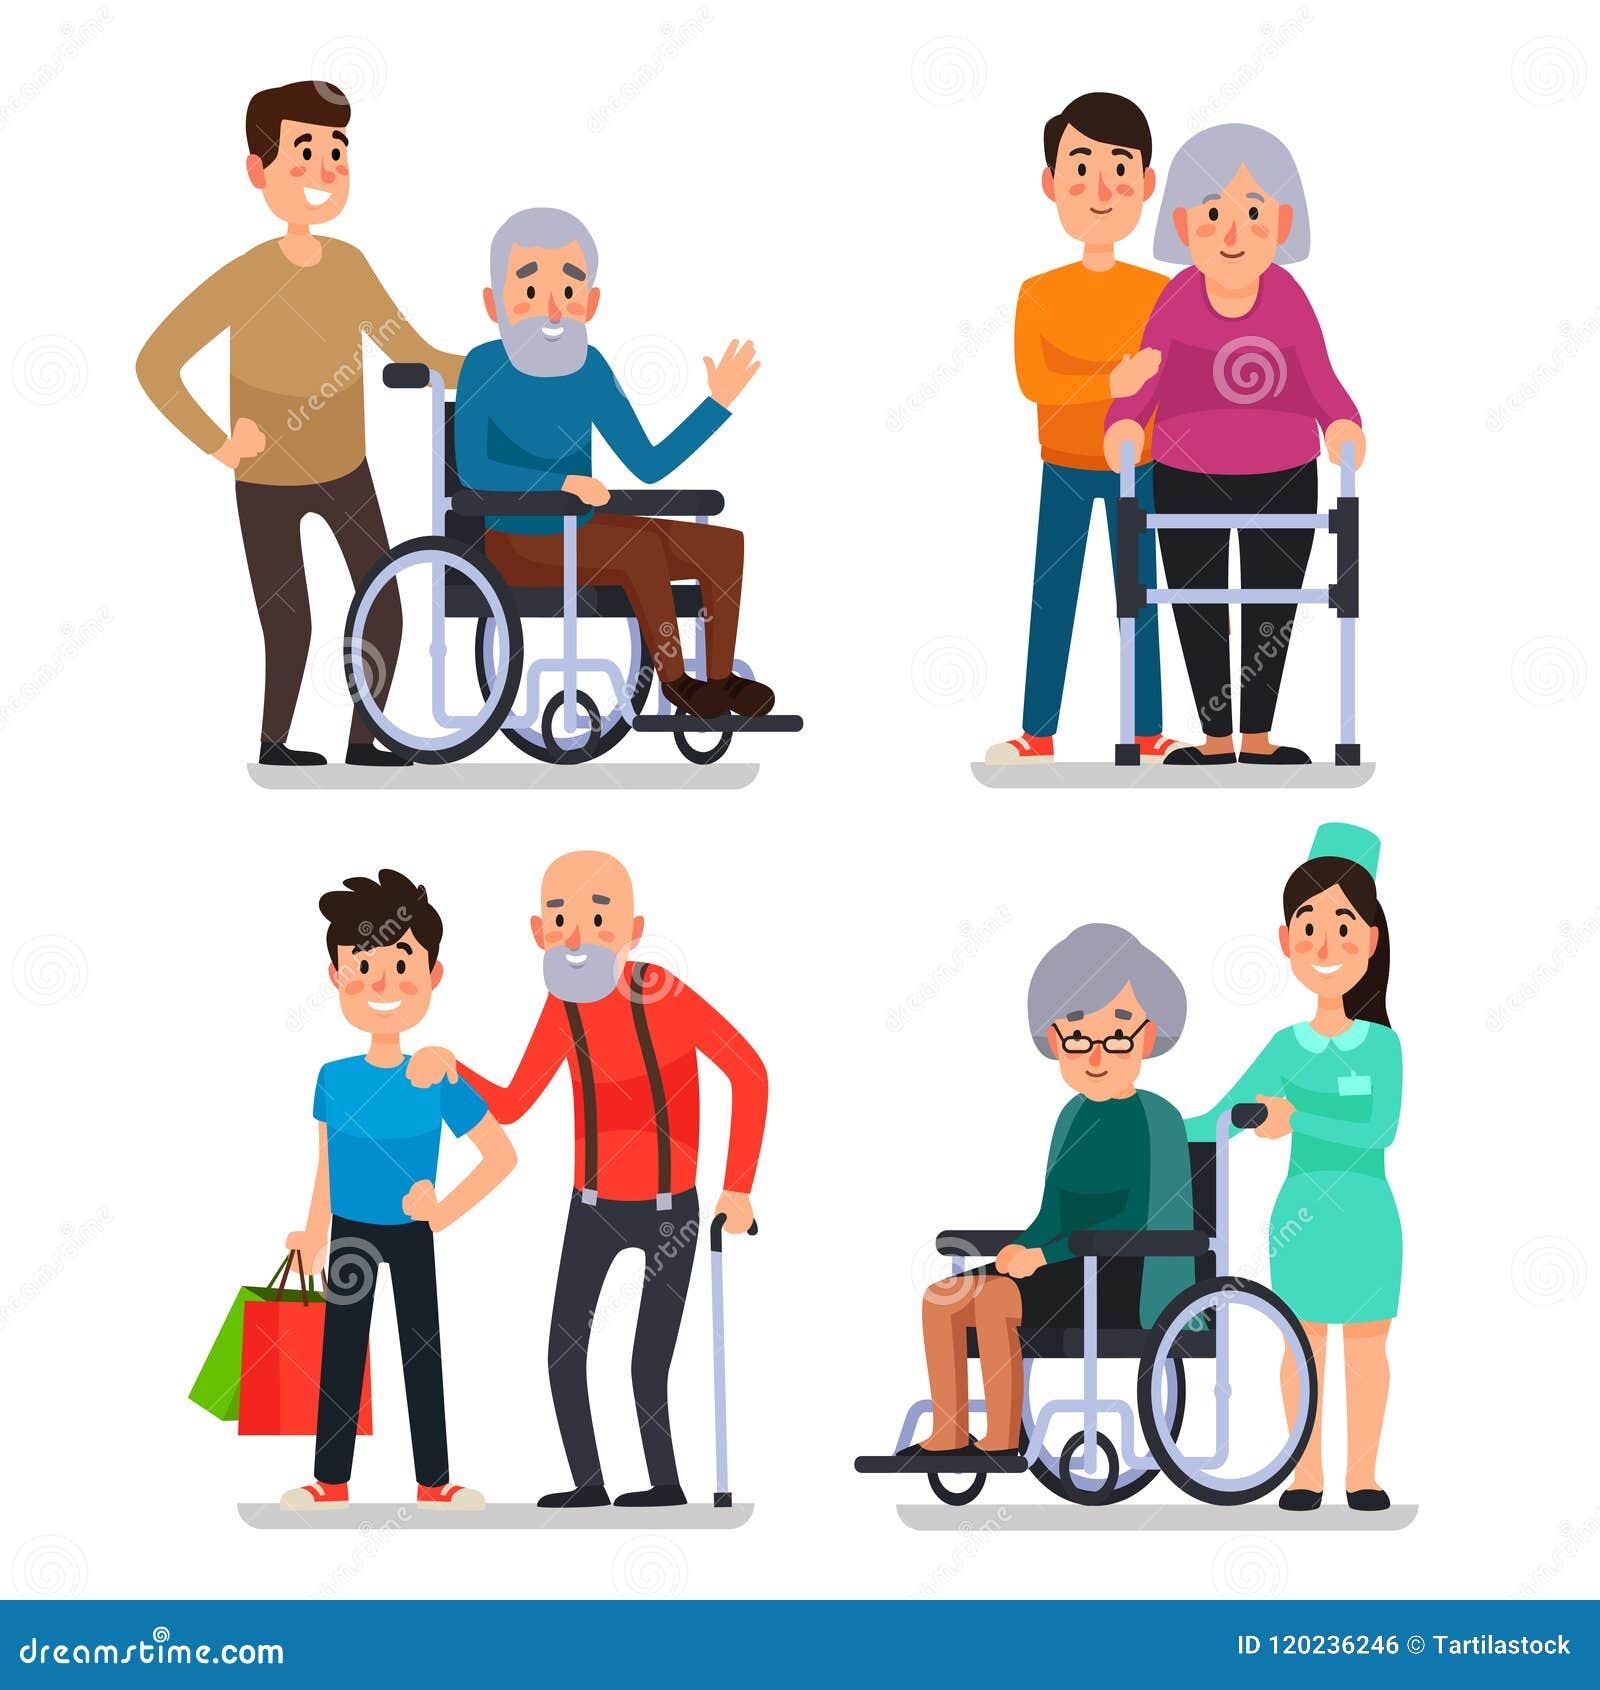 help old disabled people. social worker of volunteer community helps elderly citizens on wheelchair, senior with cane